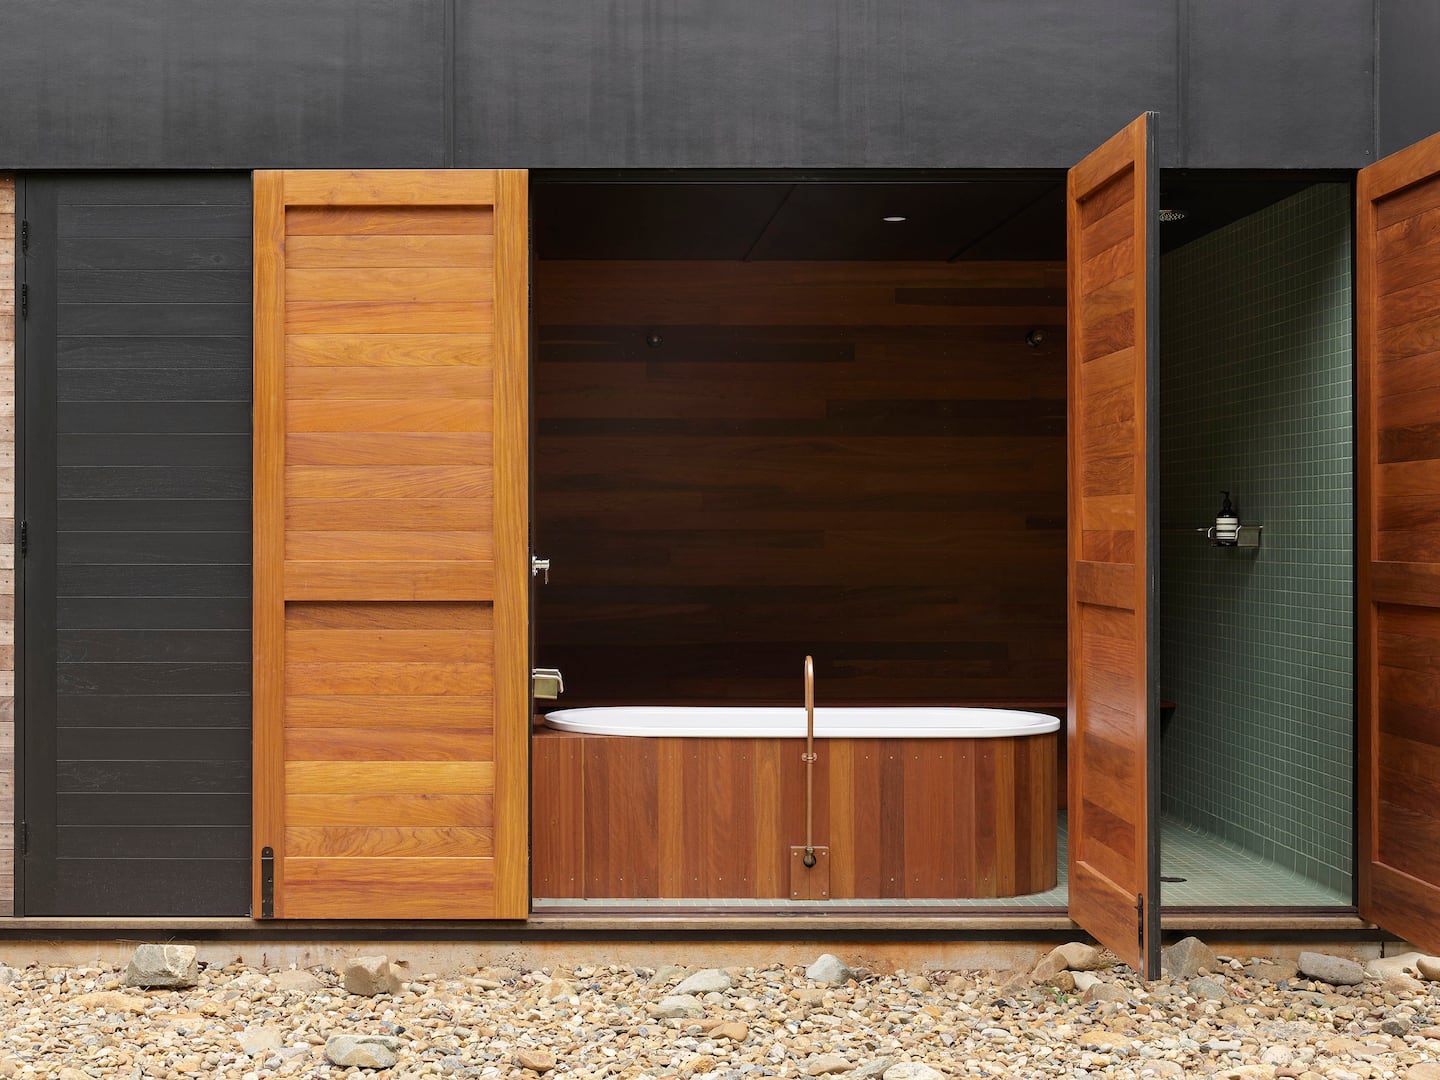 a bath in a bathroom with walls that open to the outside